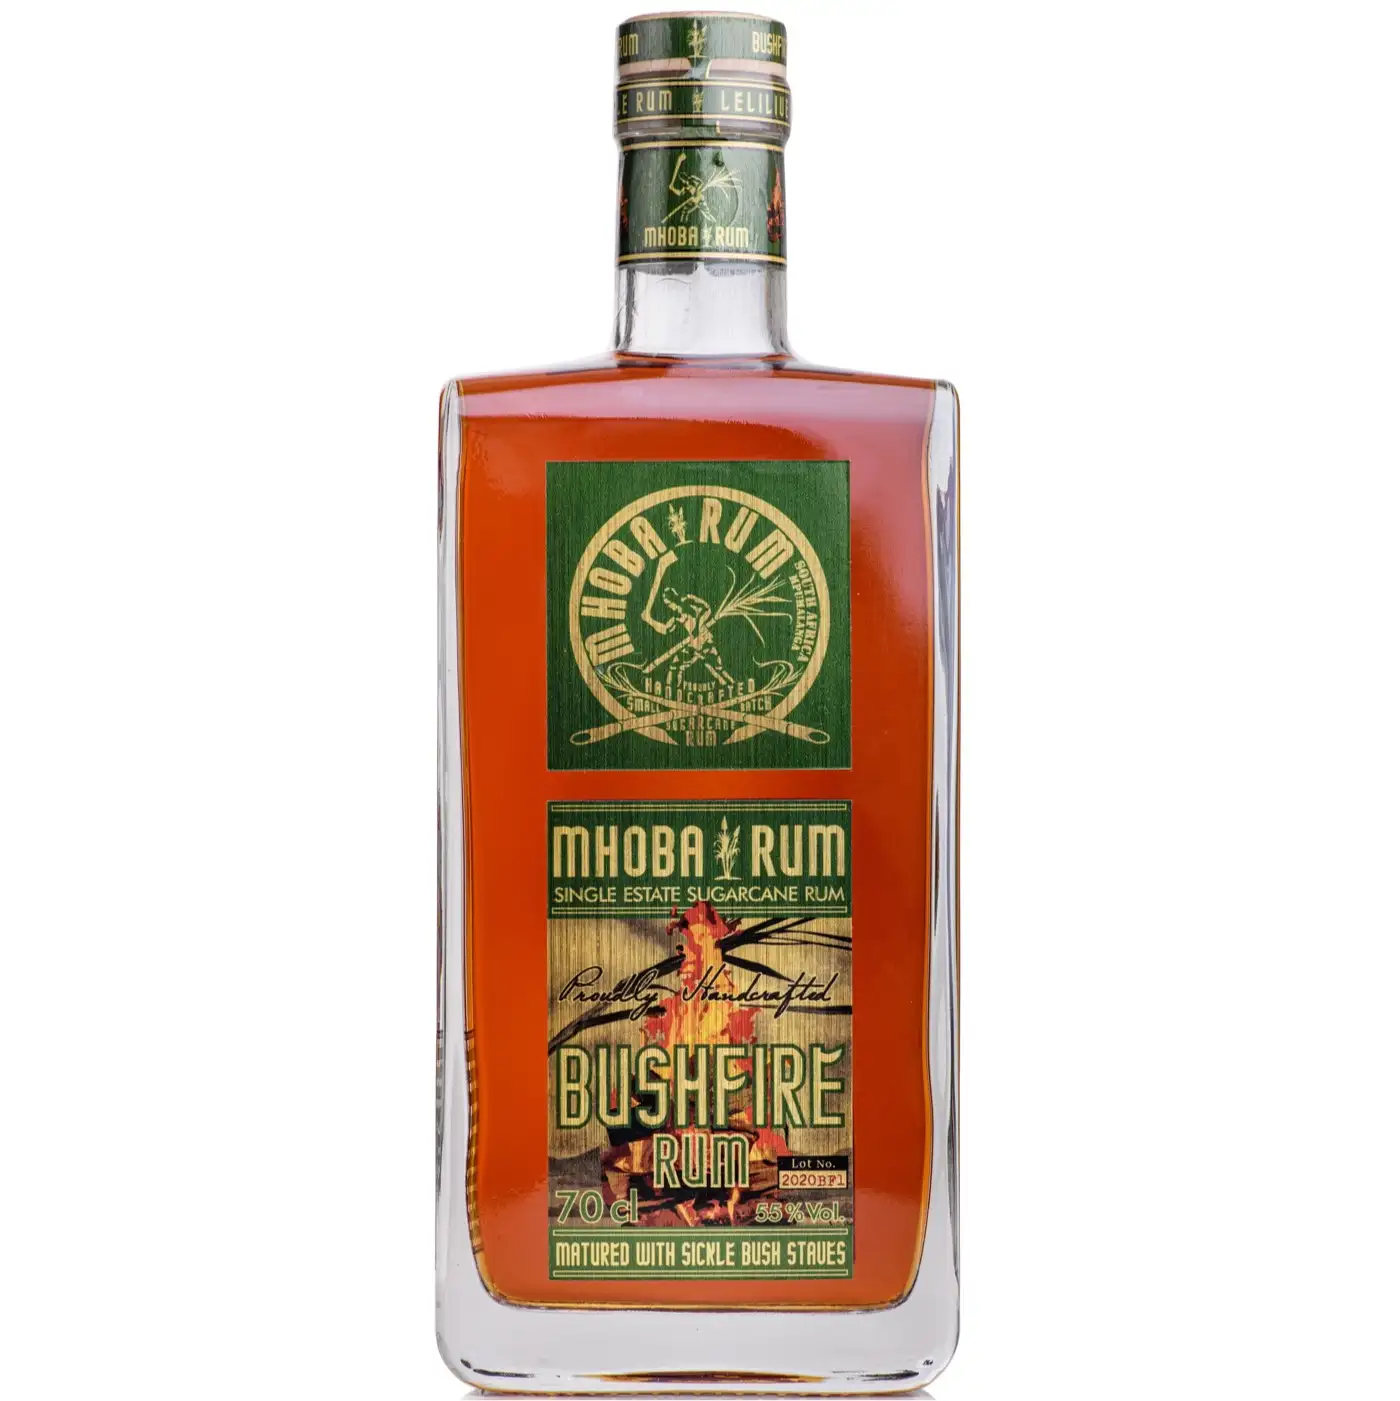 Image of the front of the bottle of the rum Bushfire